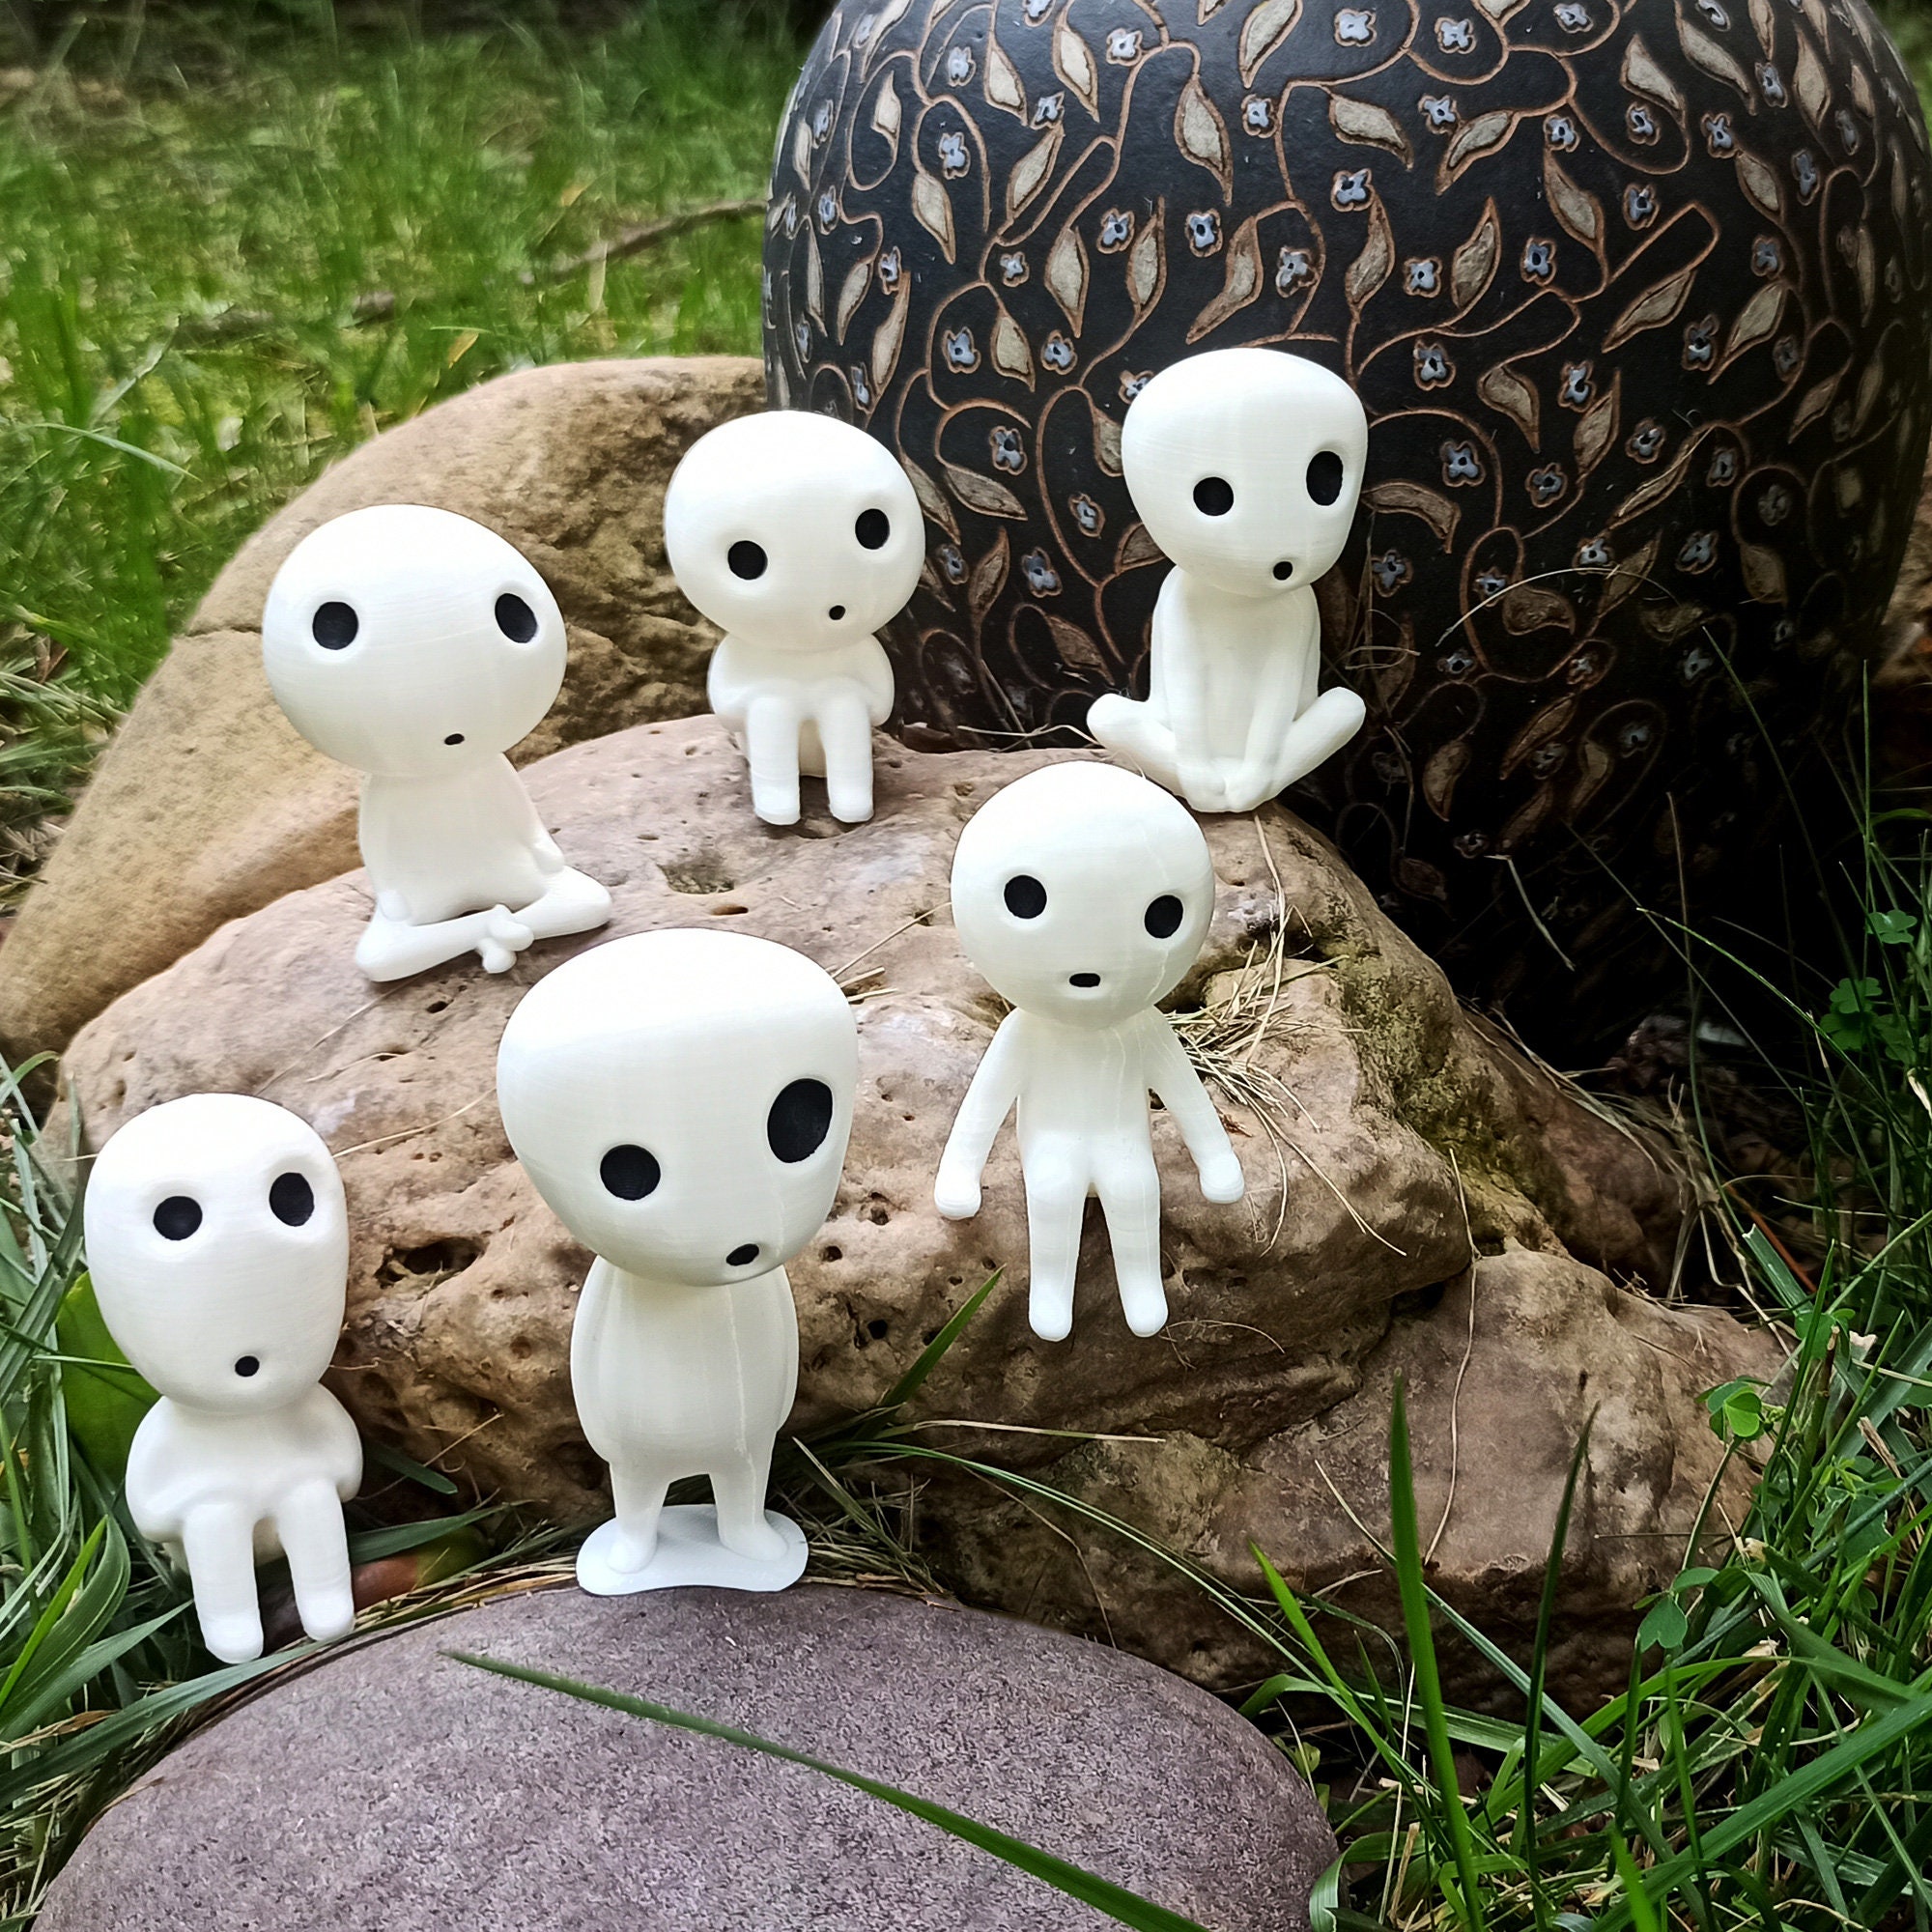 Kodama Tree Spirit, Occult & Obscure Clothing